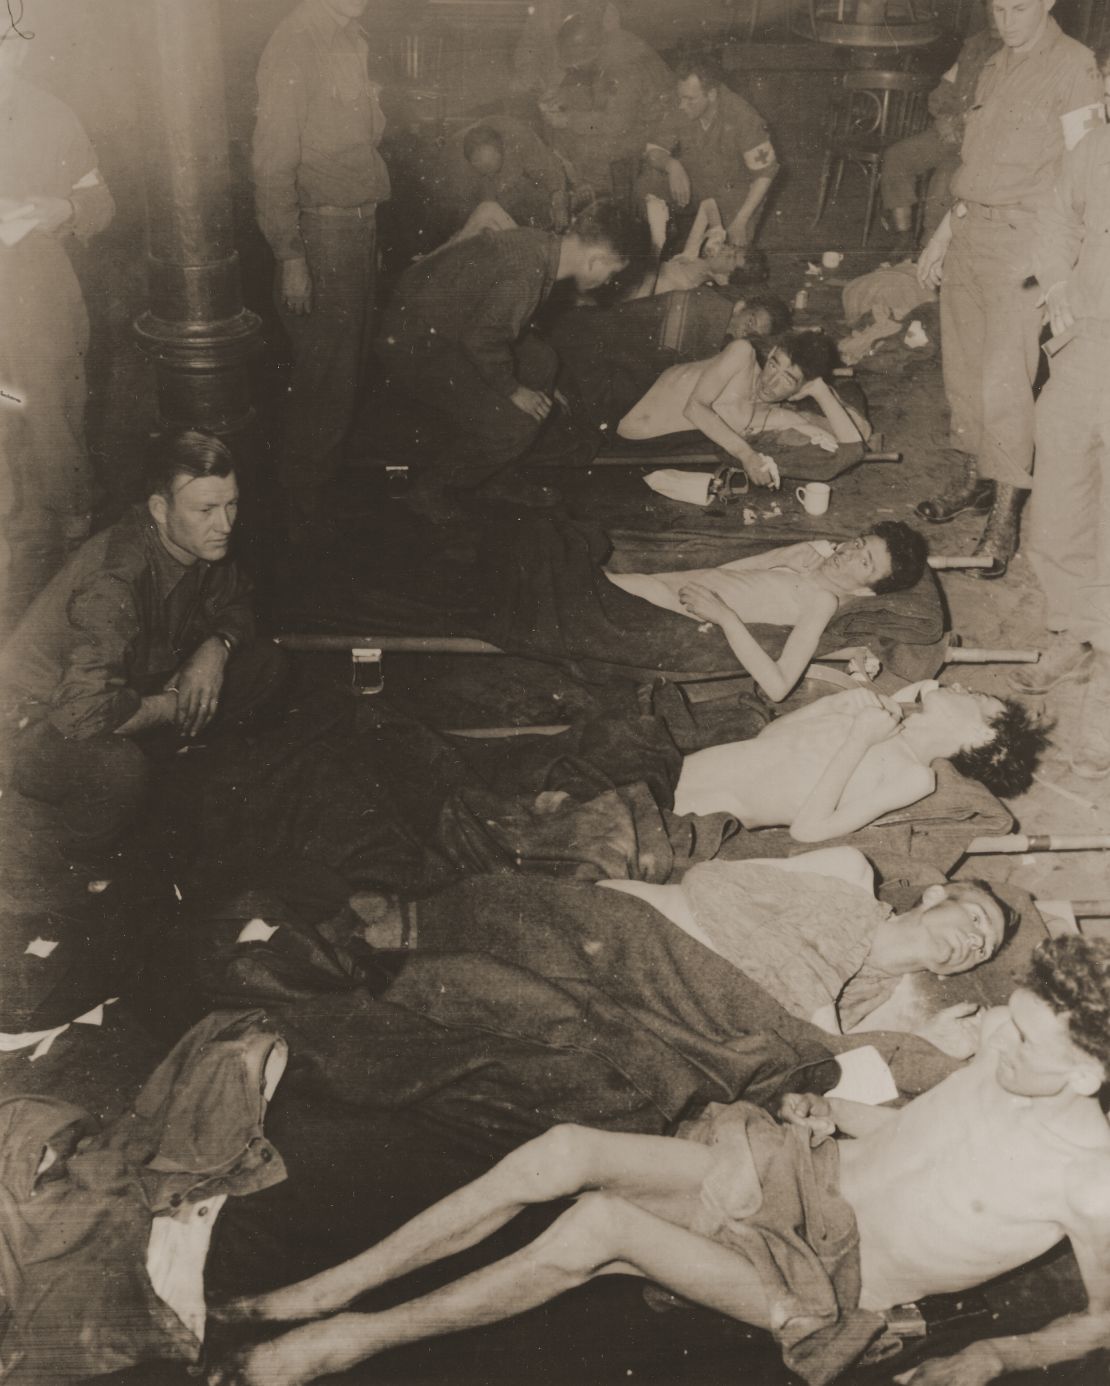 US soldiers had been starved and abused by Nazis inside the slave labor camp known as Berga.